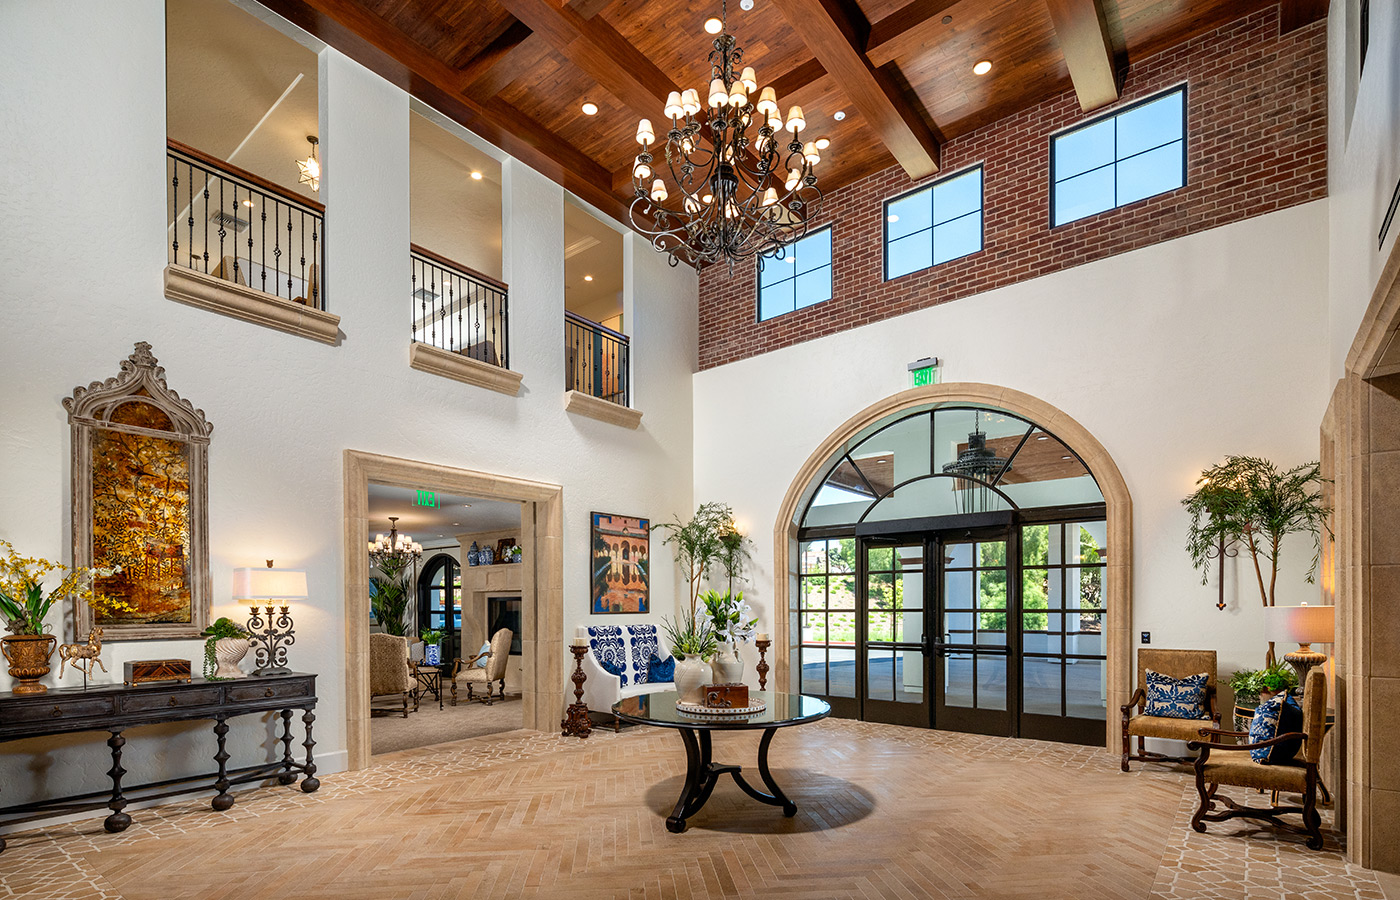 A large lobby with high ceilings.